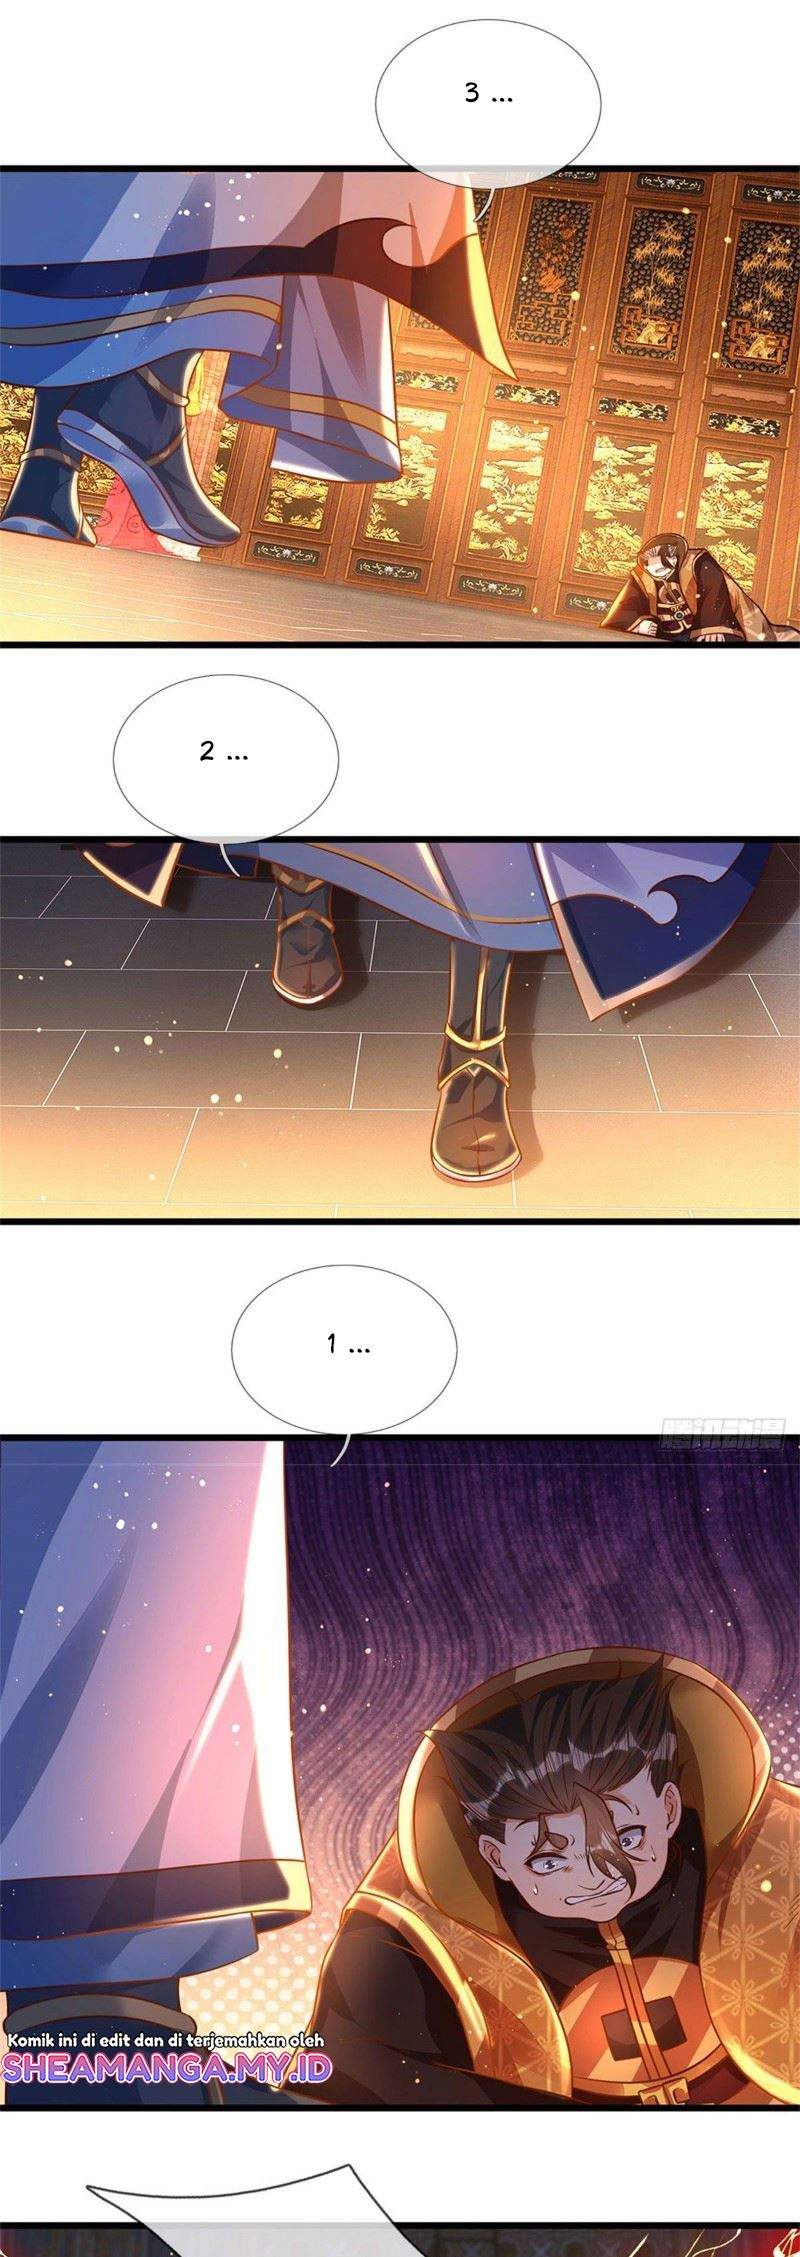 Star Sign In To Supreme Dantian Chapter 42